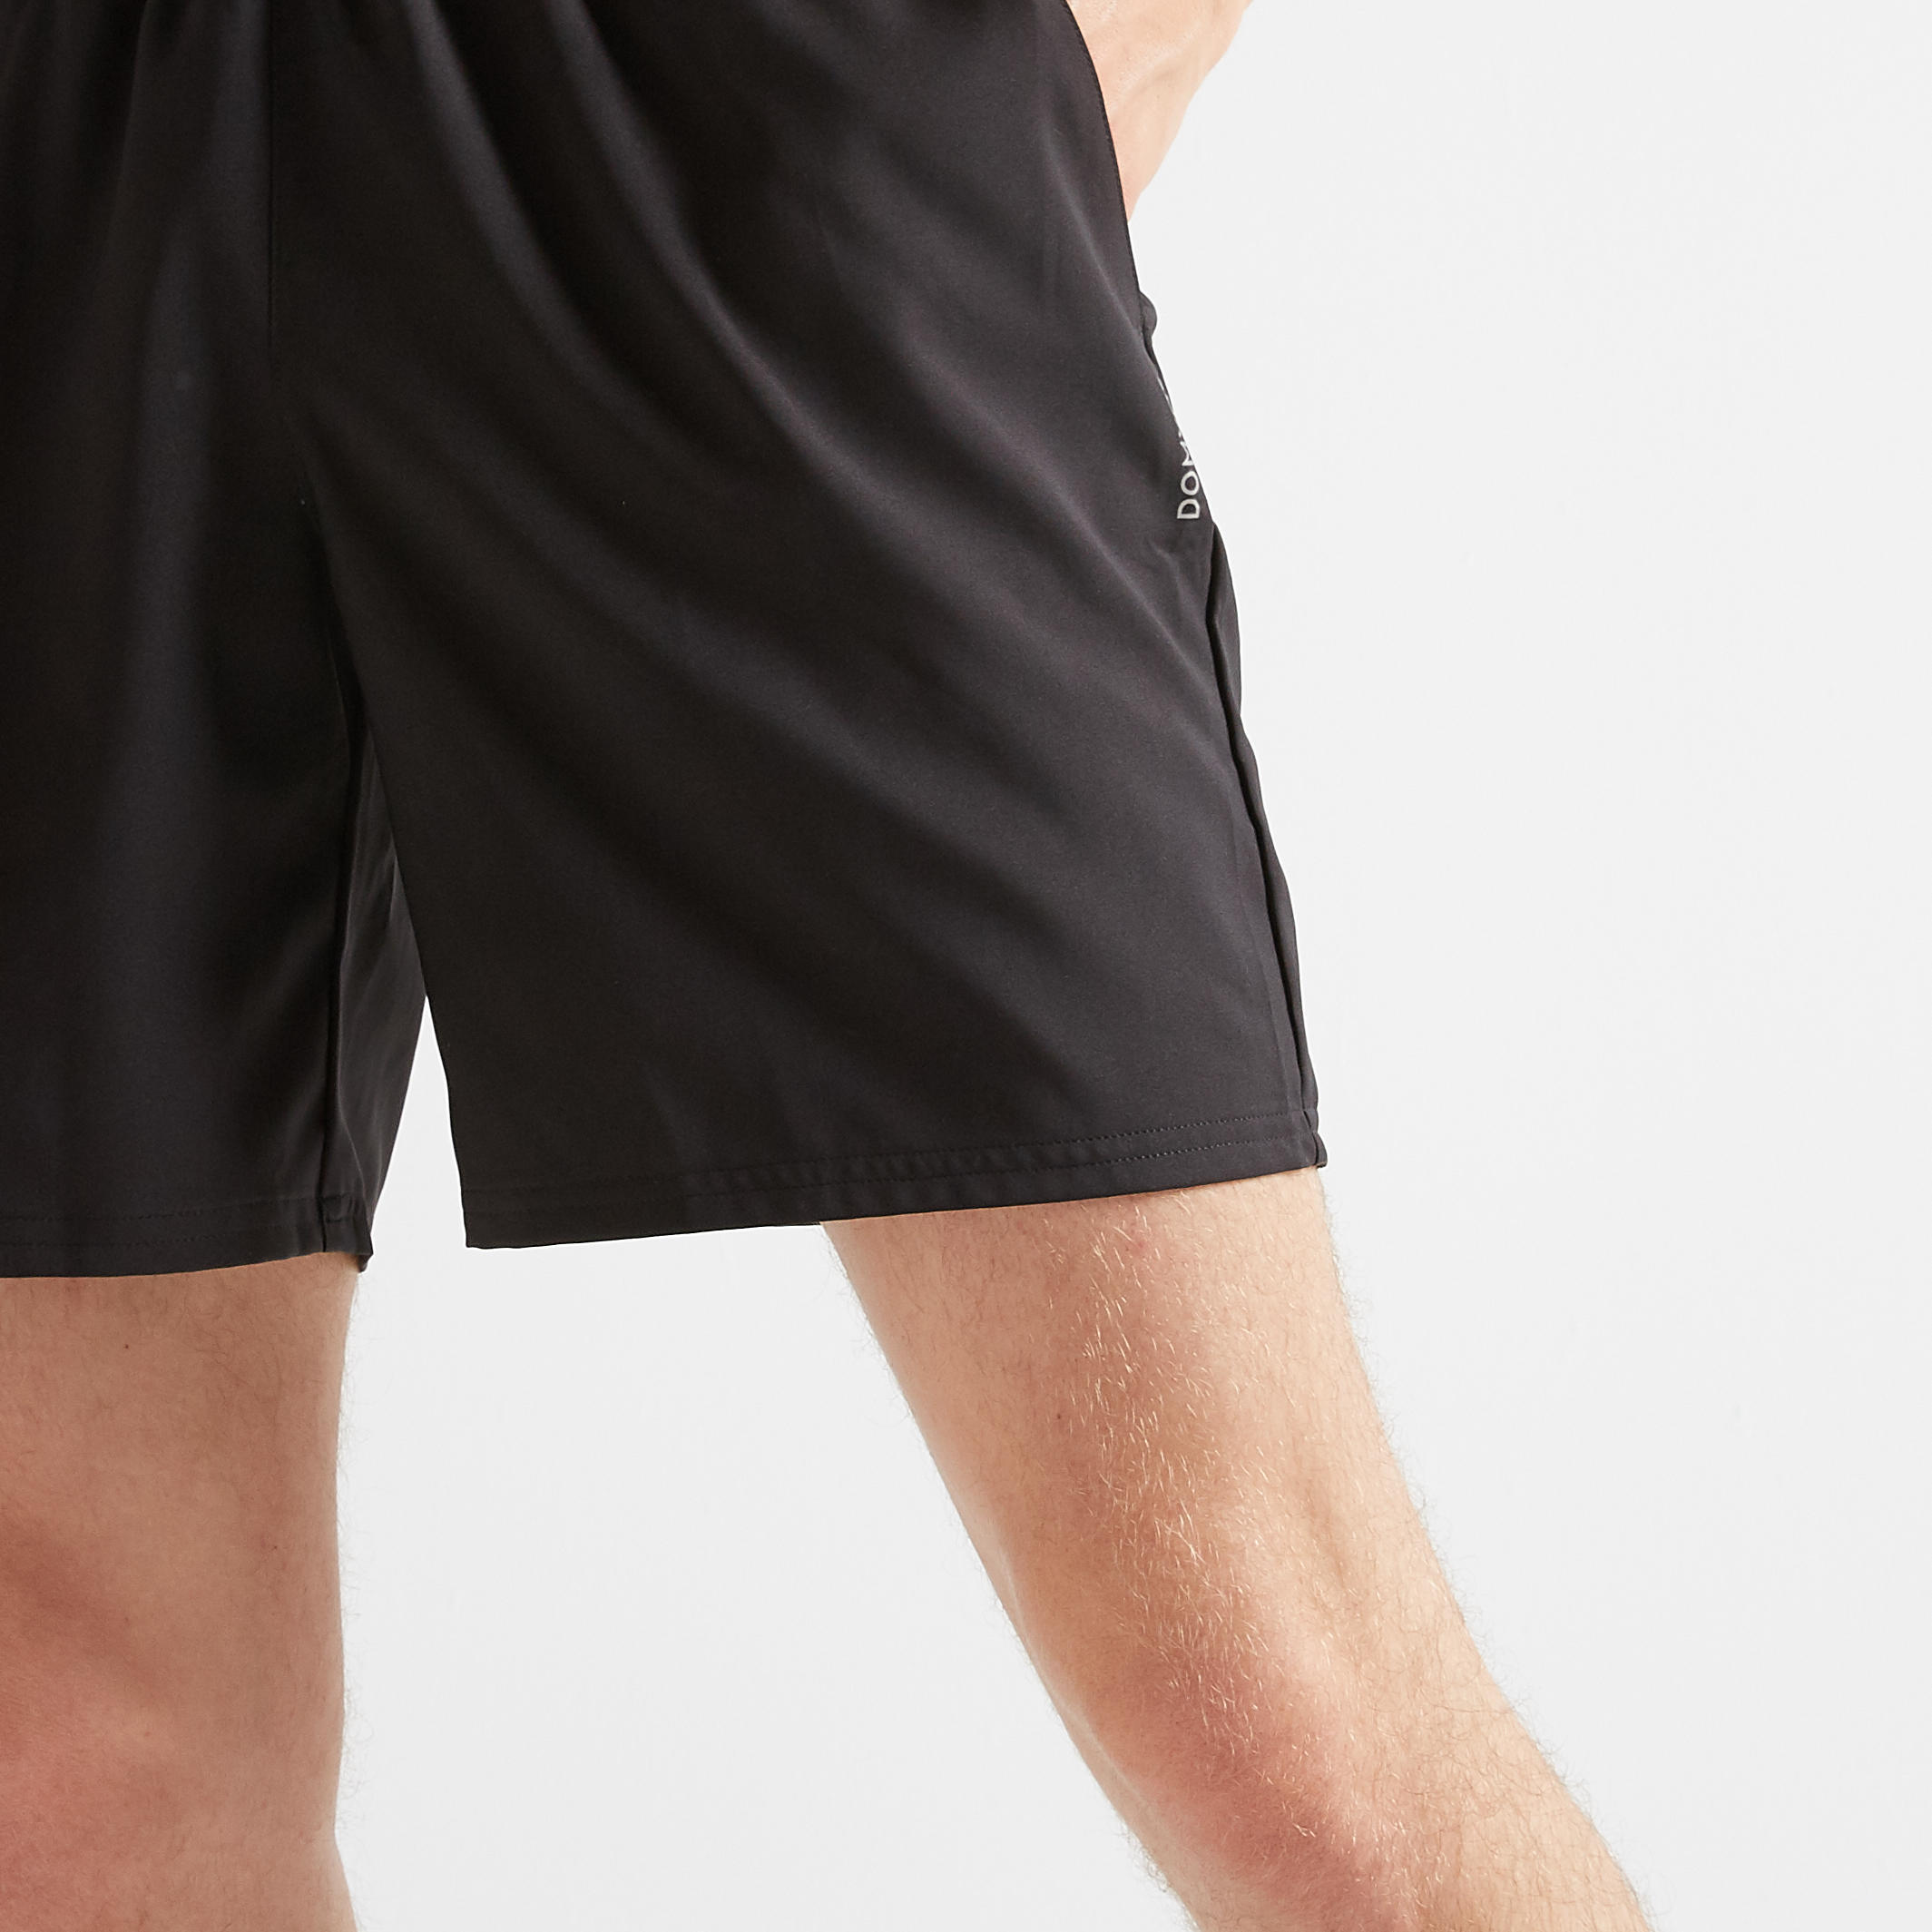 Men's Breathable Breathable Fitness Shorts - Black 6/7